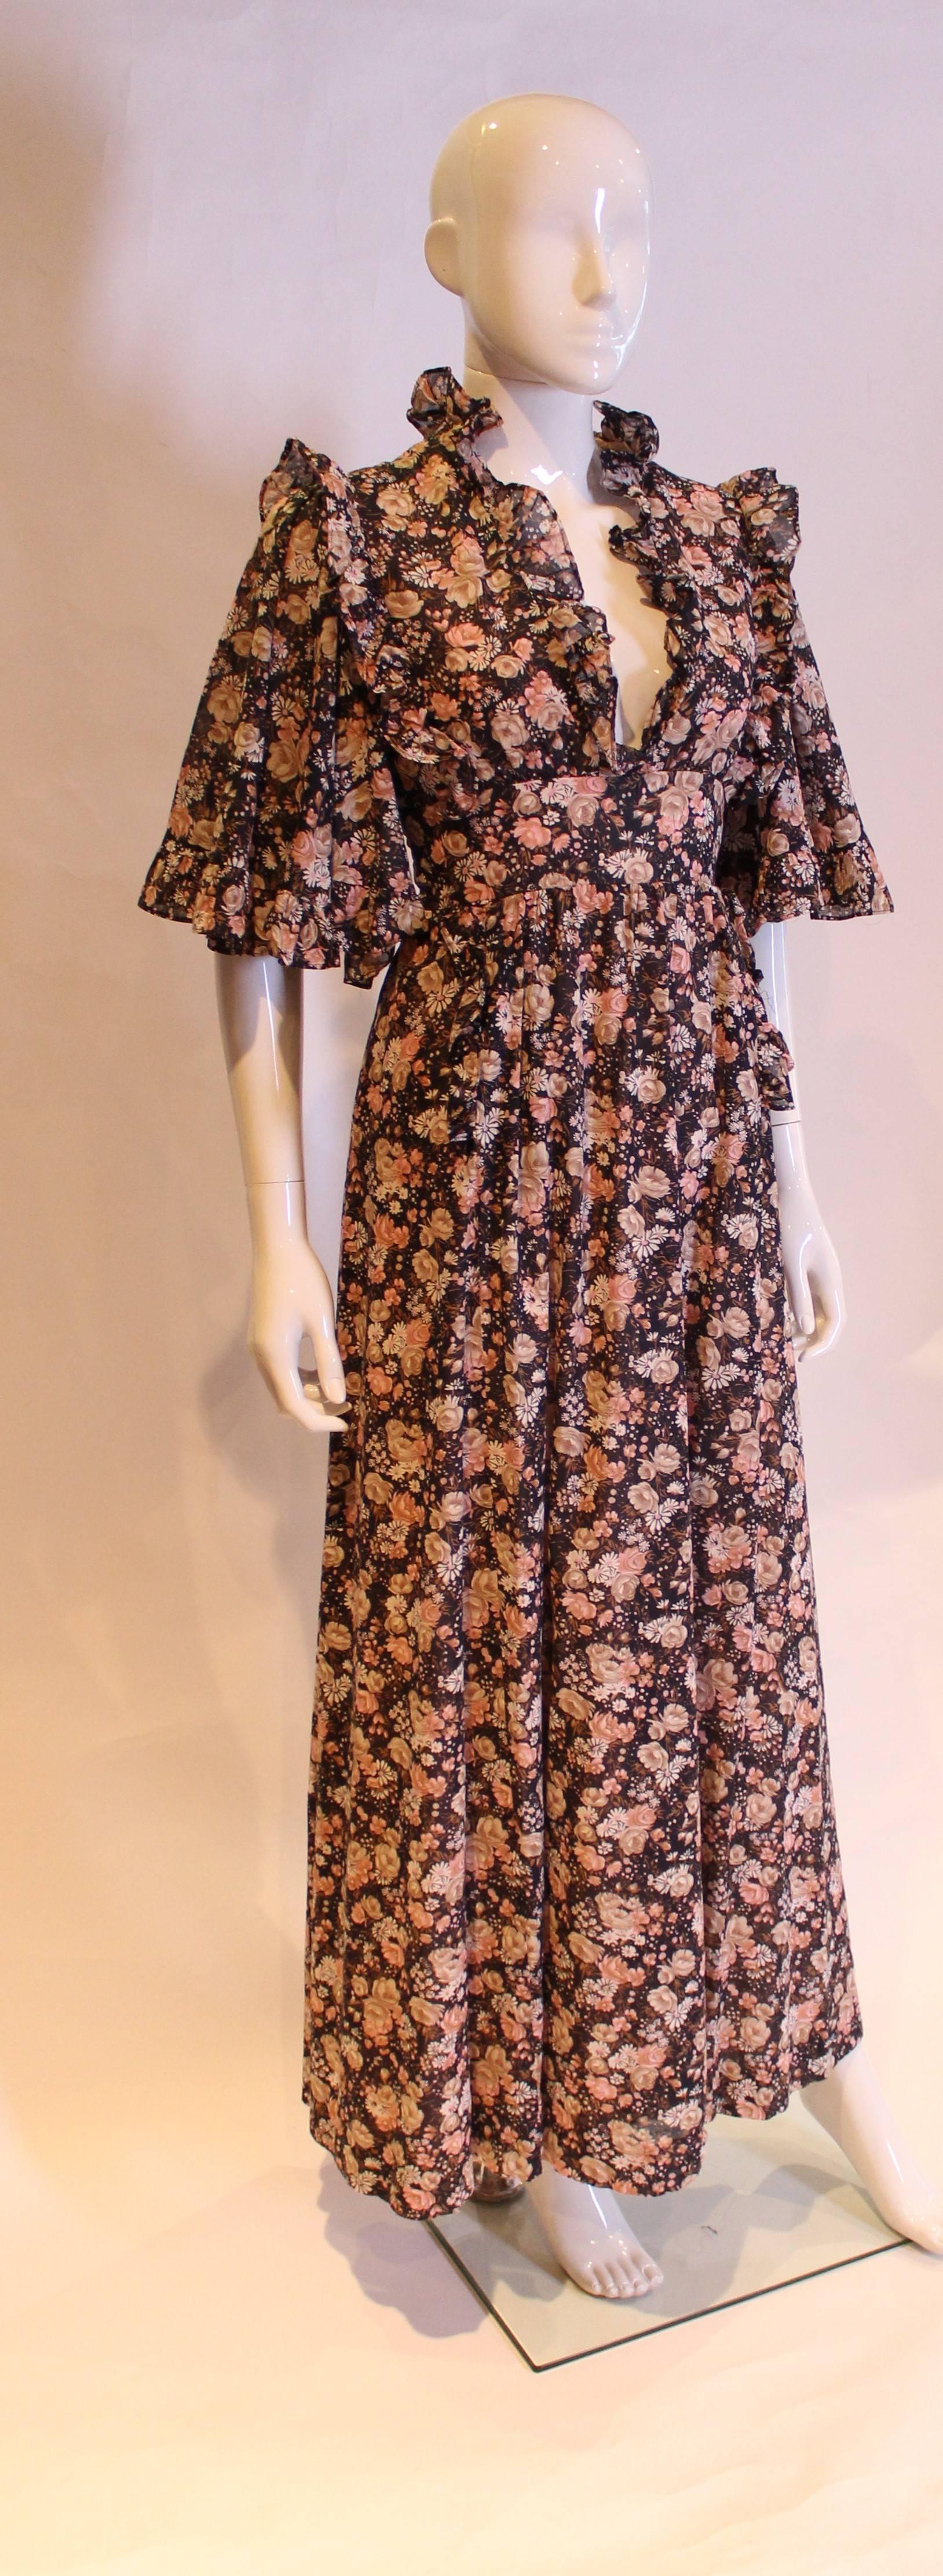 Women's Gina Fratini Floral Cotton Gown